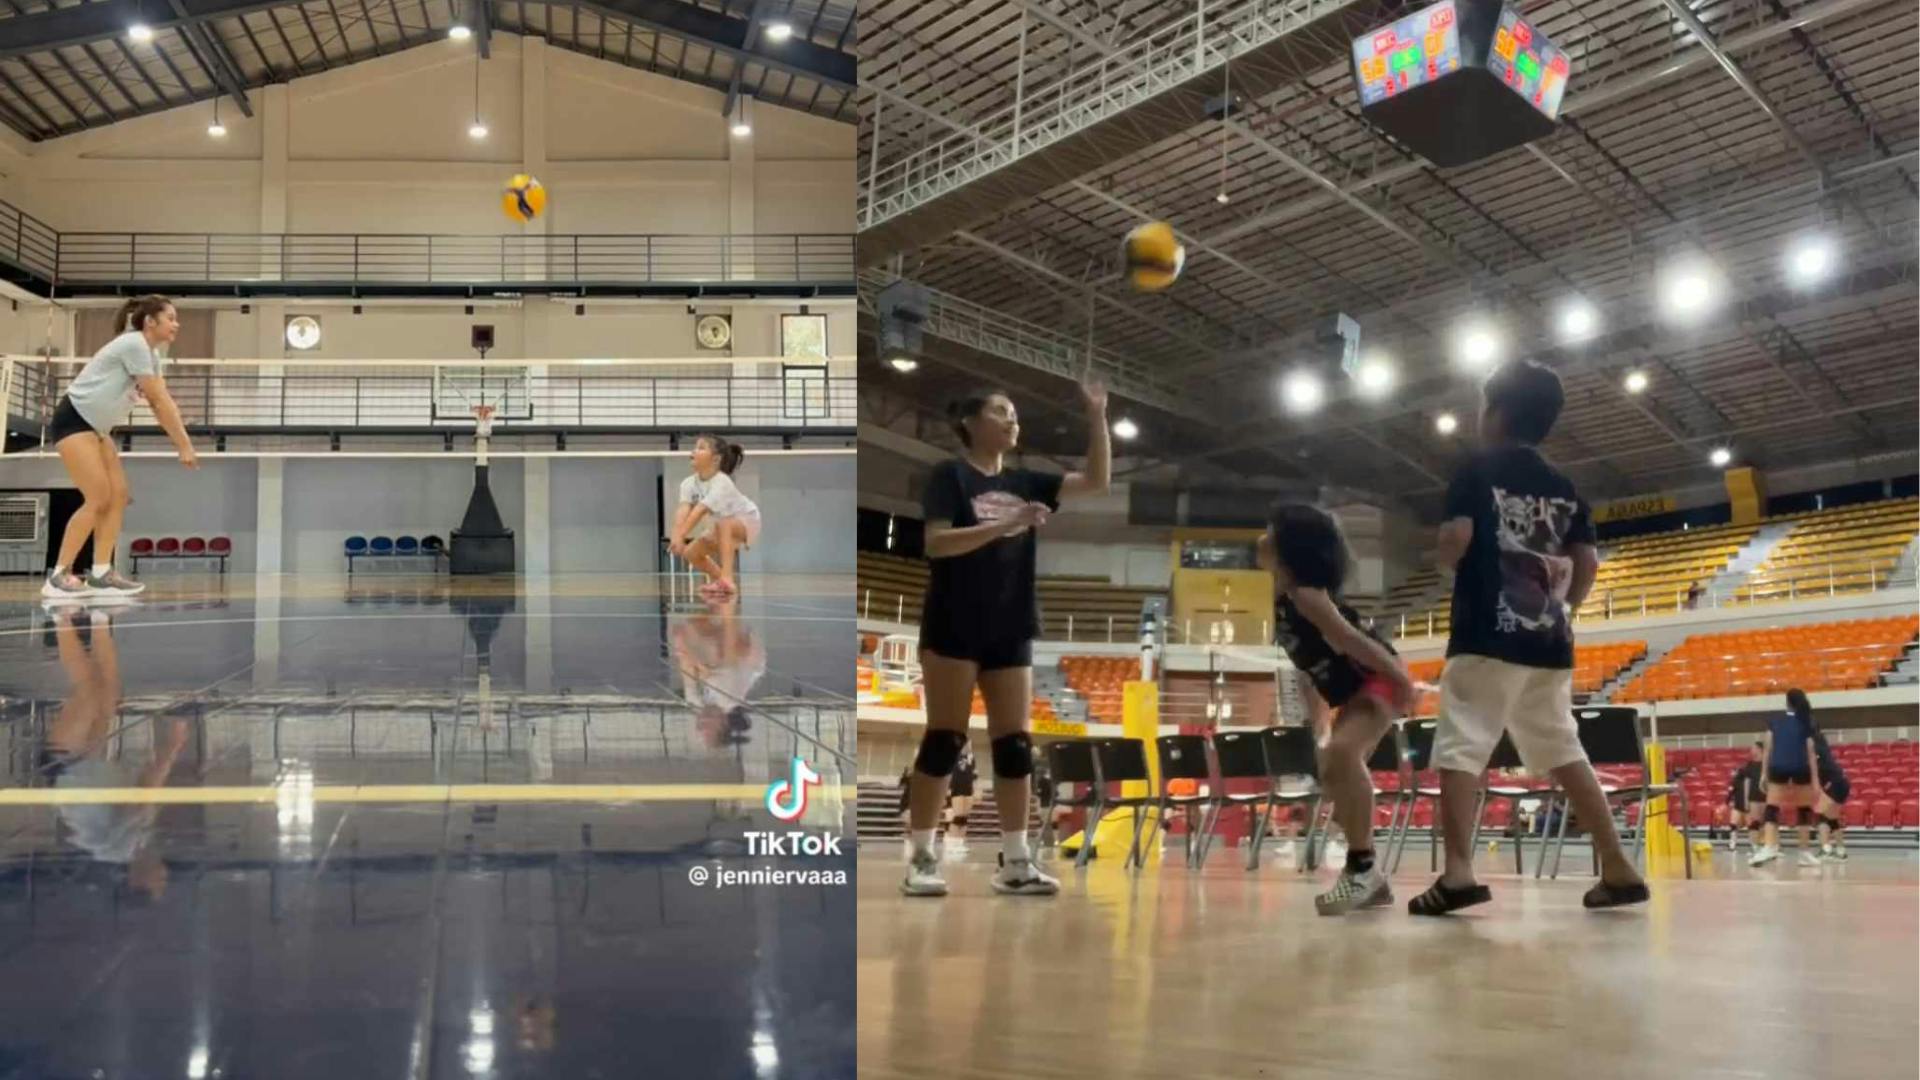 Coach in the Making? Chery Tiggo libero Jen Nierva shows potential in her Volleyball 101 with Iska